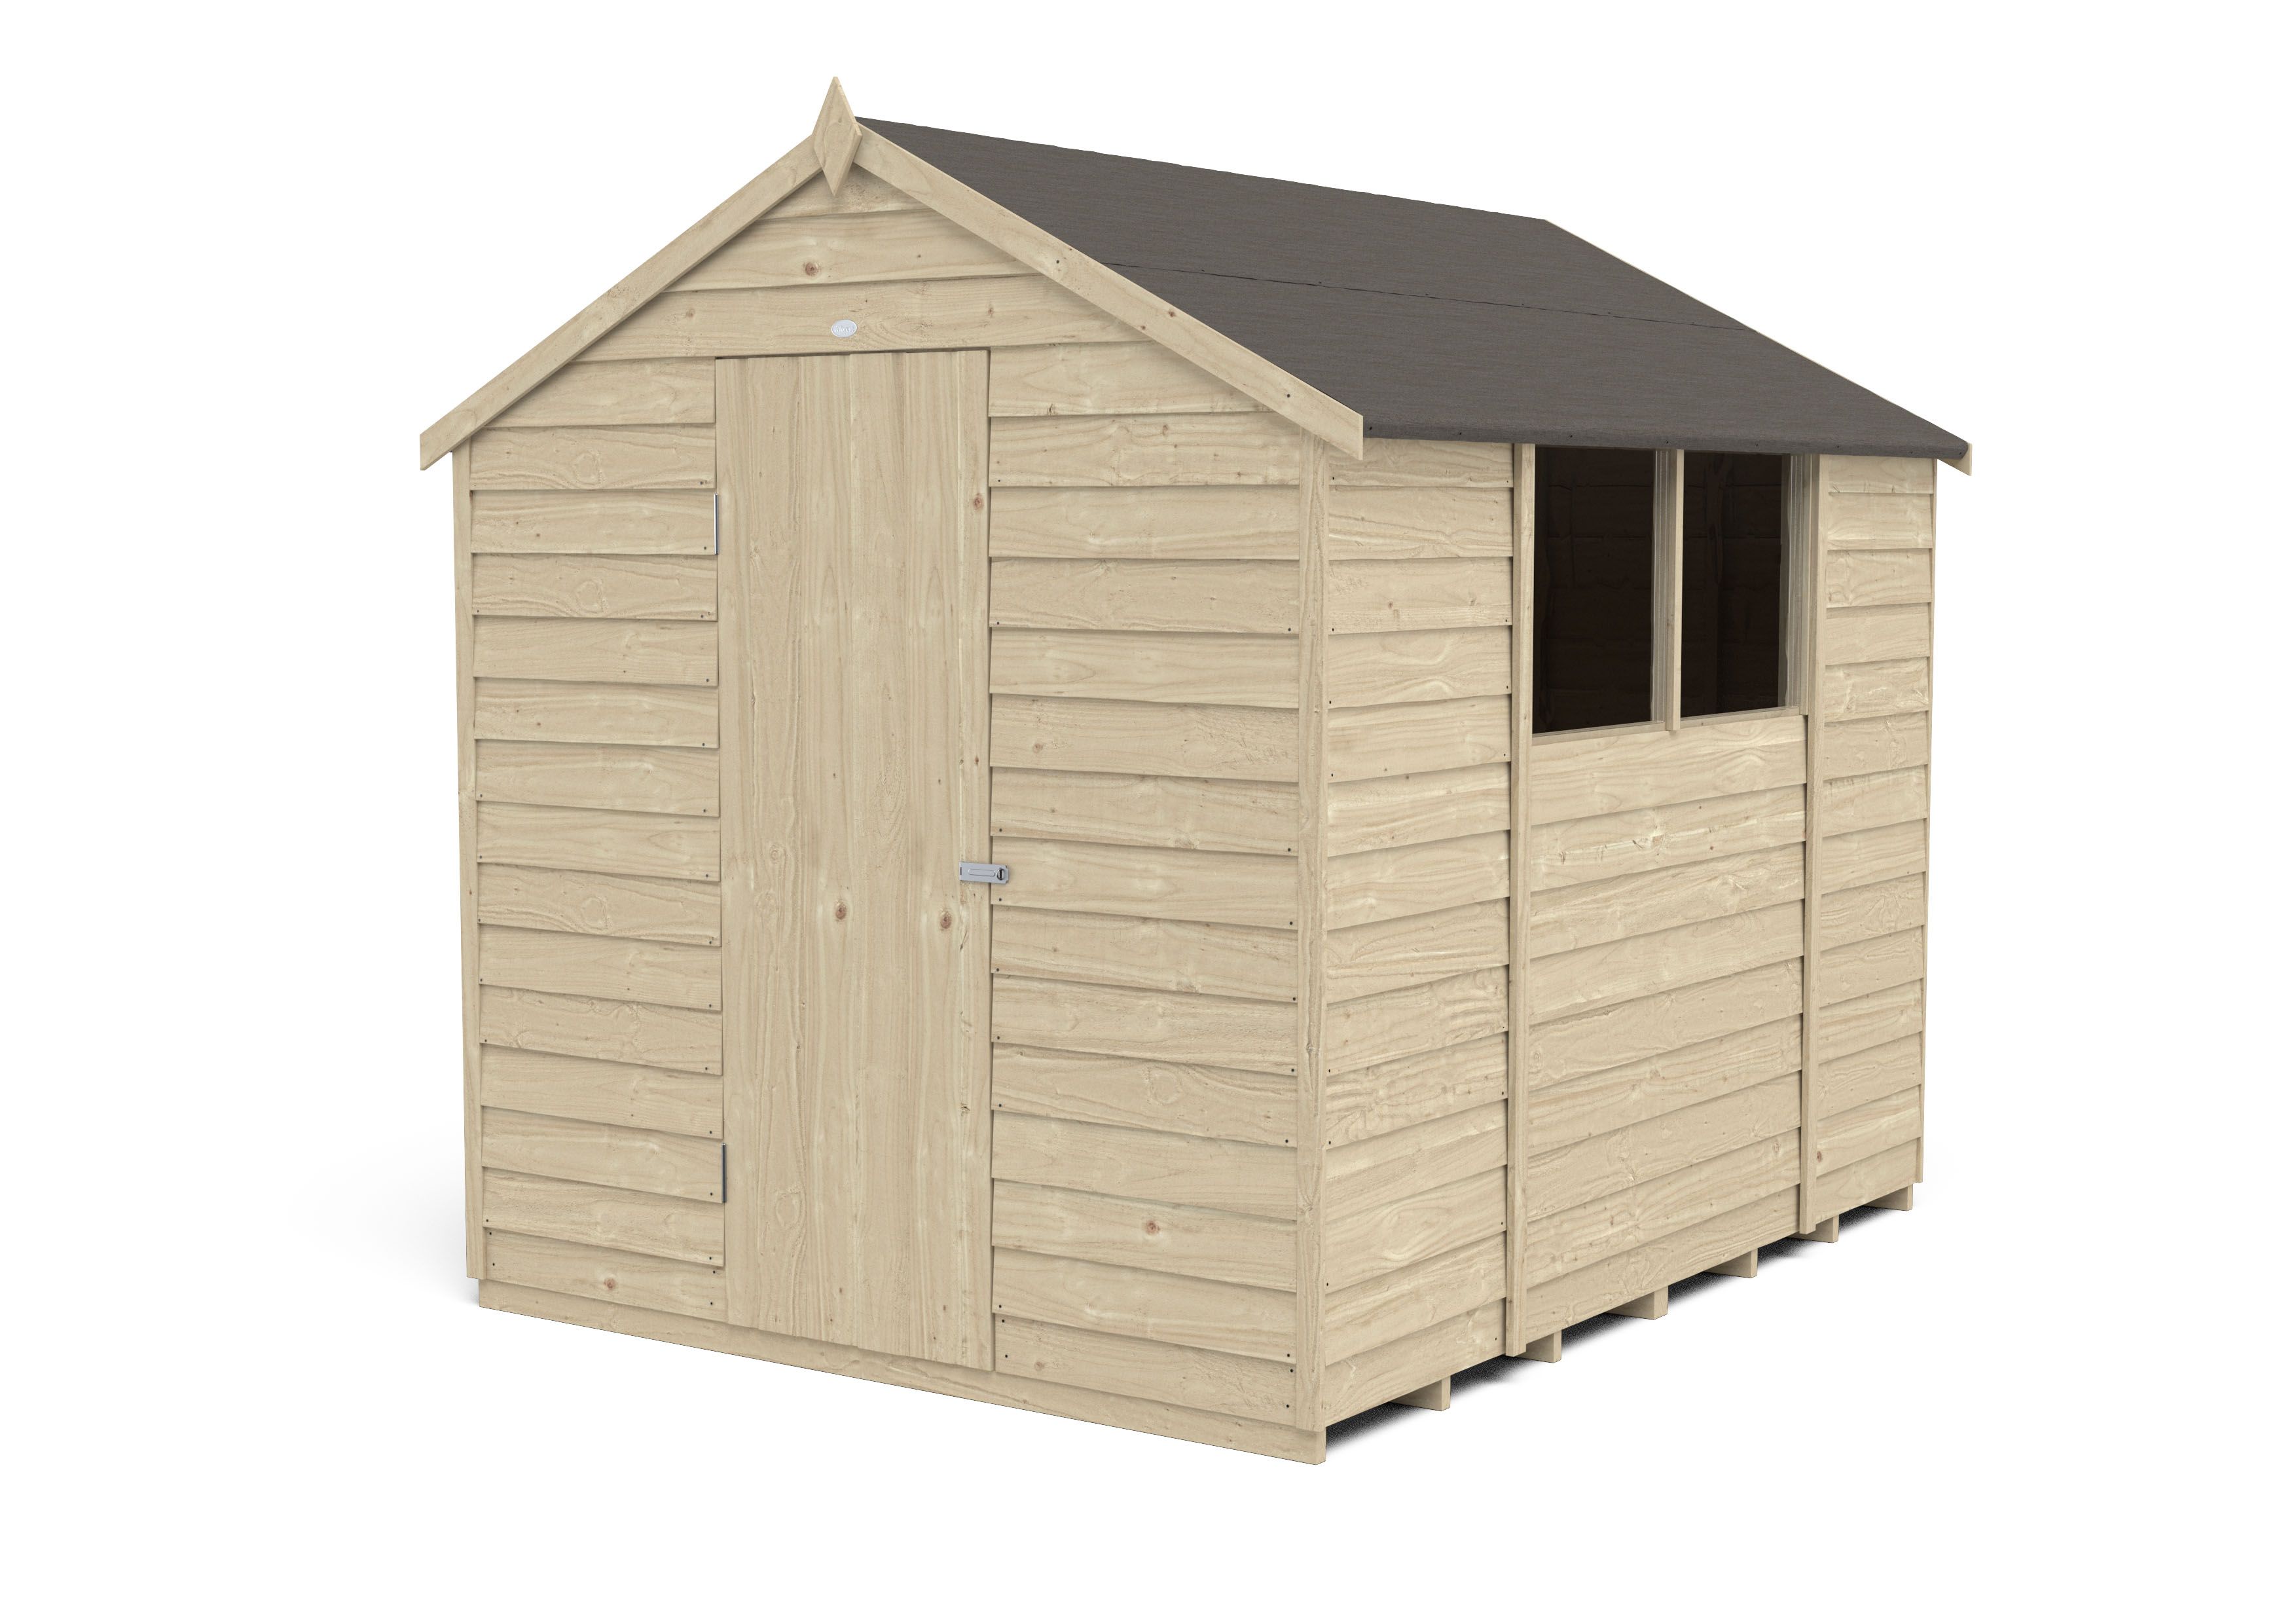 Forest Garden Overlap 8x6 ft Apex Wooden Pressure treated Shed with floor & 2 windows (Base included) - Assembly service included